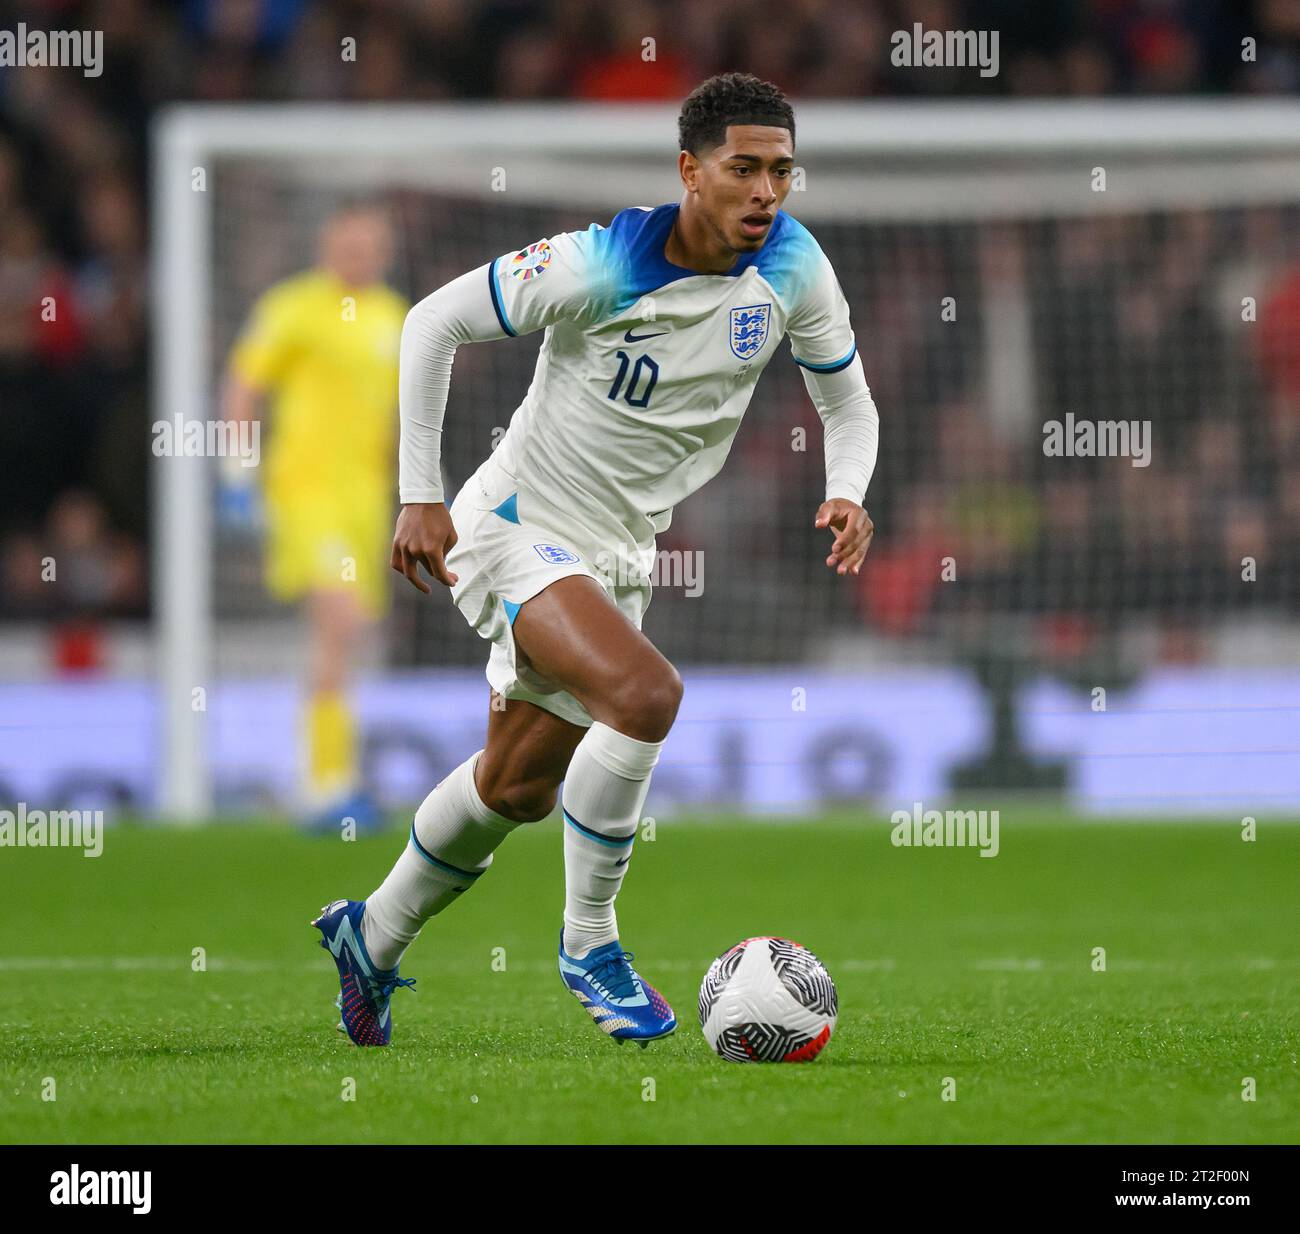 17 Oct 2023 - England v Italy - Euro 2024 Qualifier - Wembley Stadium.  England's Jude Bellingham during the match against Italy. Picture : Mark Pain / Alamy Live News Stock Photo